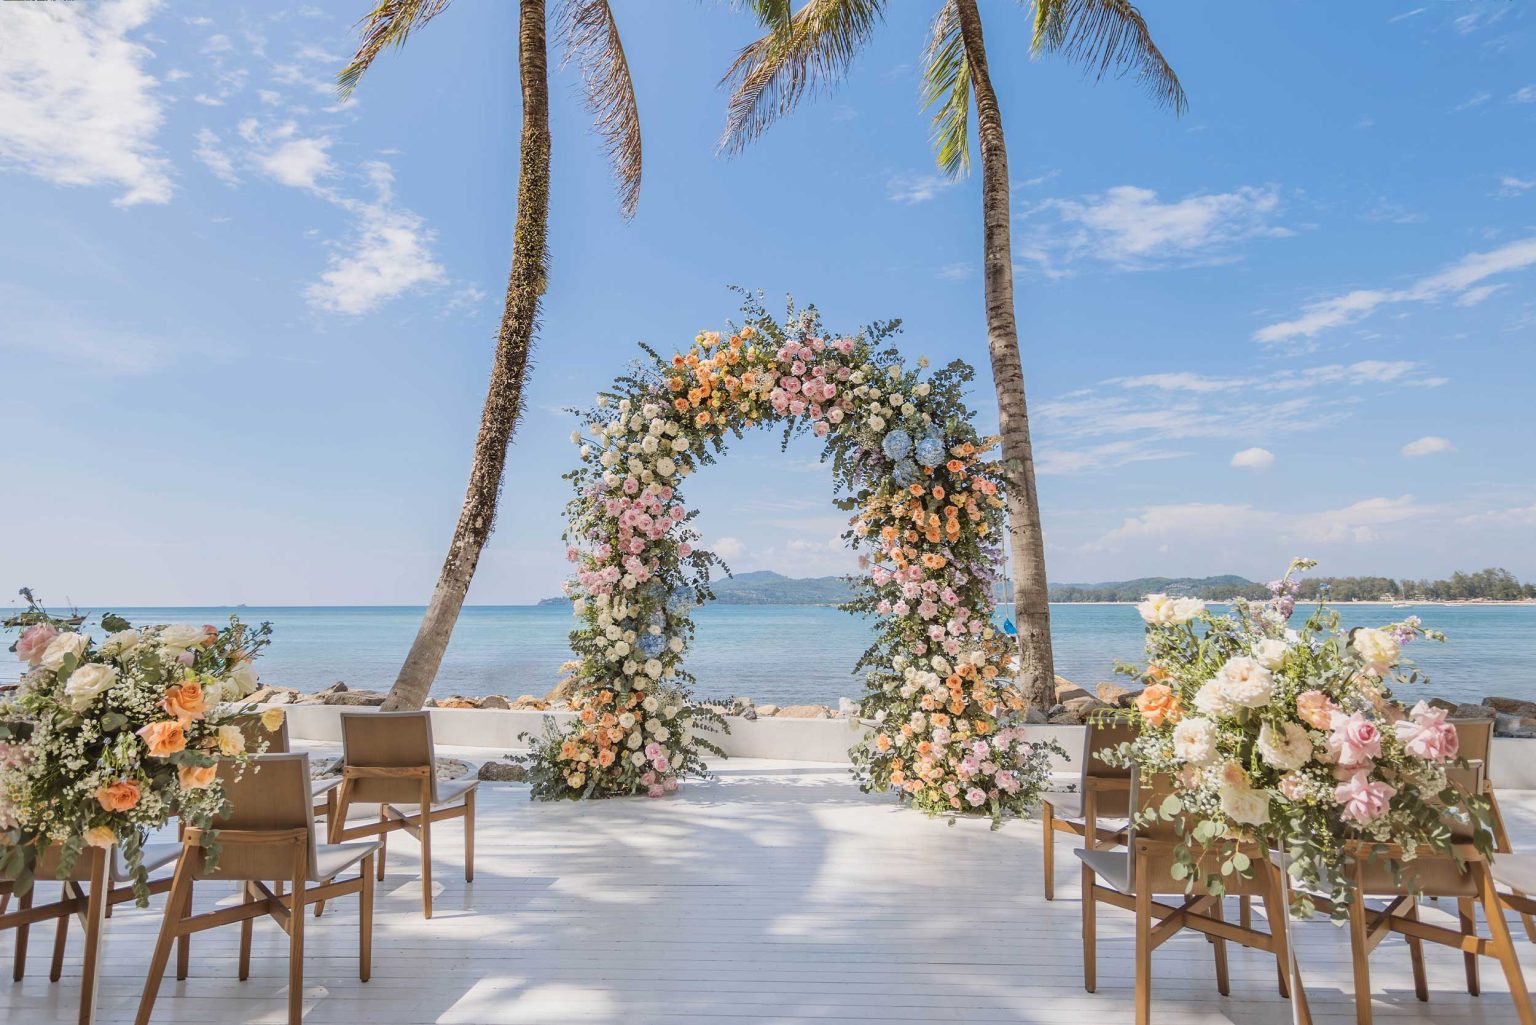 Our handpicked selection of venues offers sensational settings to say “I do” in paradise.